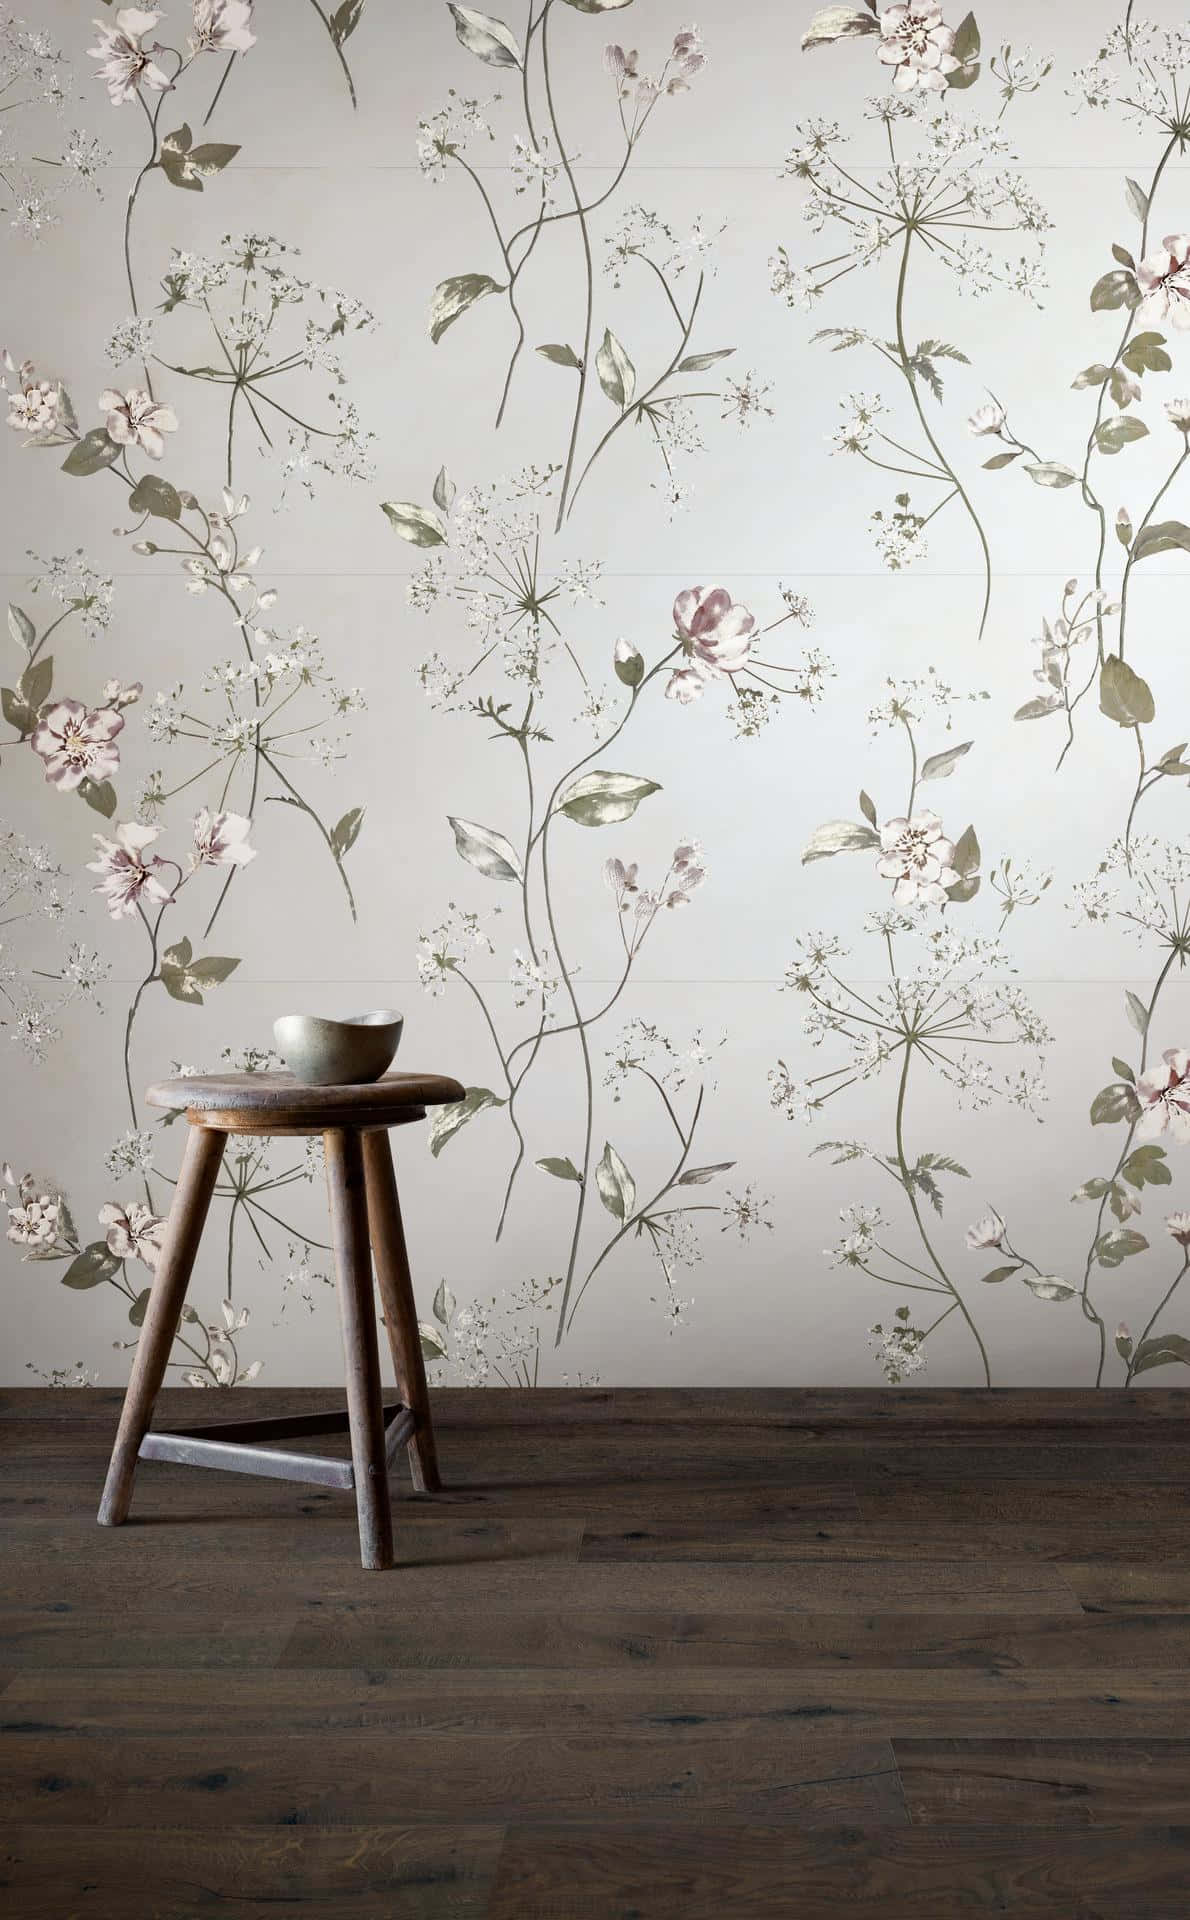 A Wallpaper With A Floral Pattern And A Stool